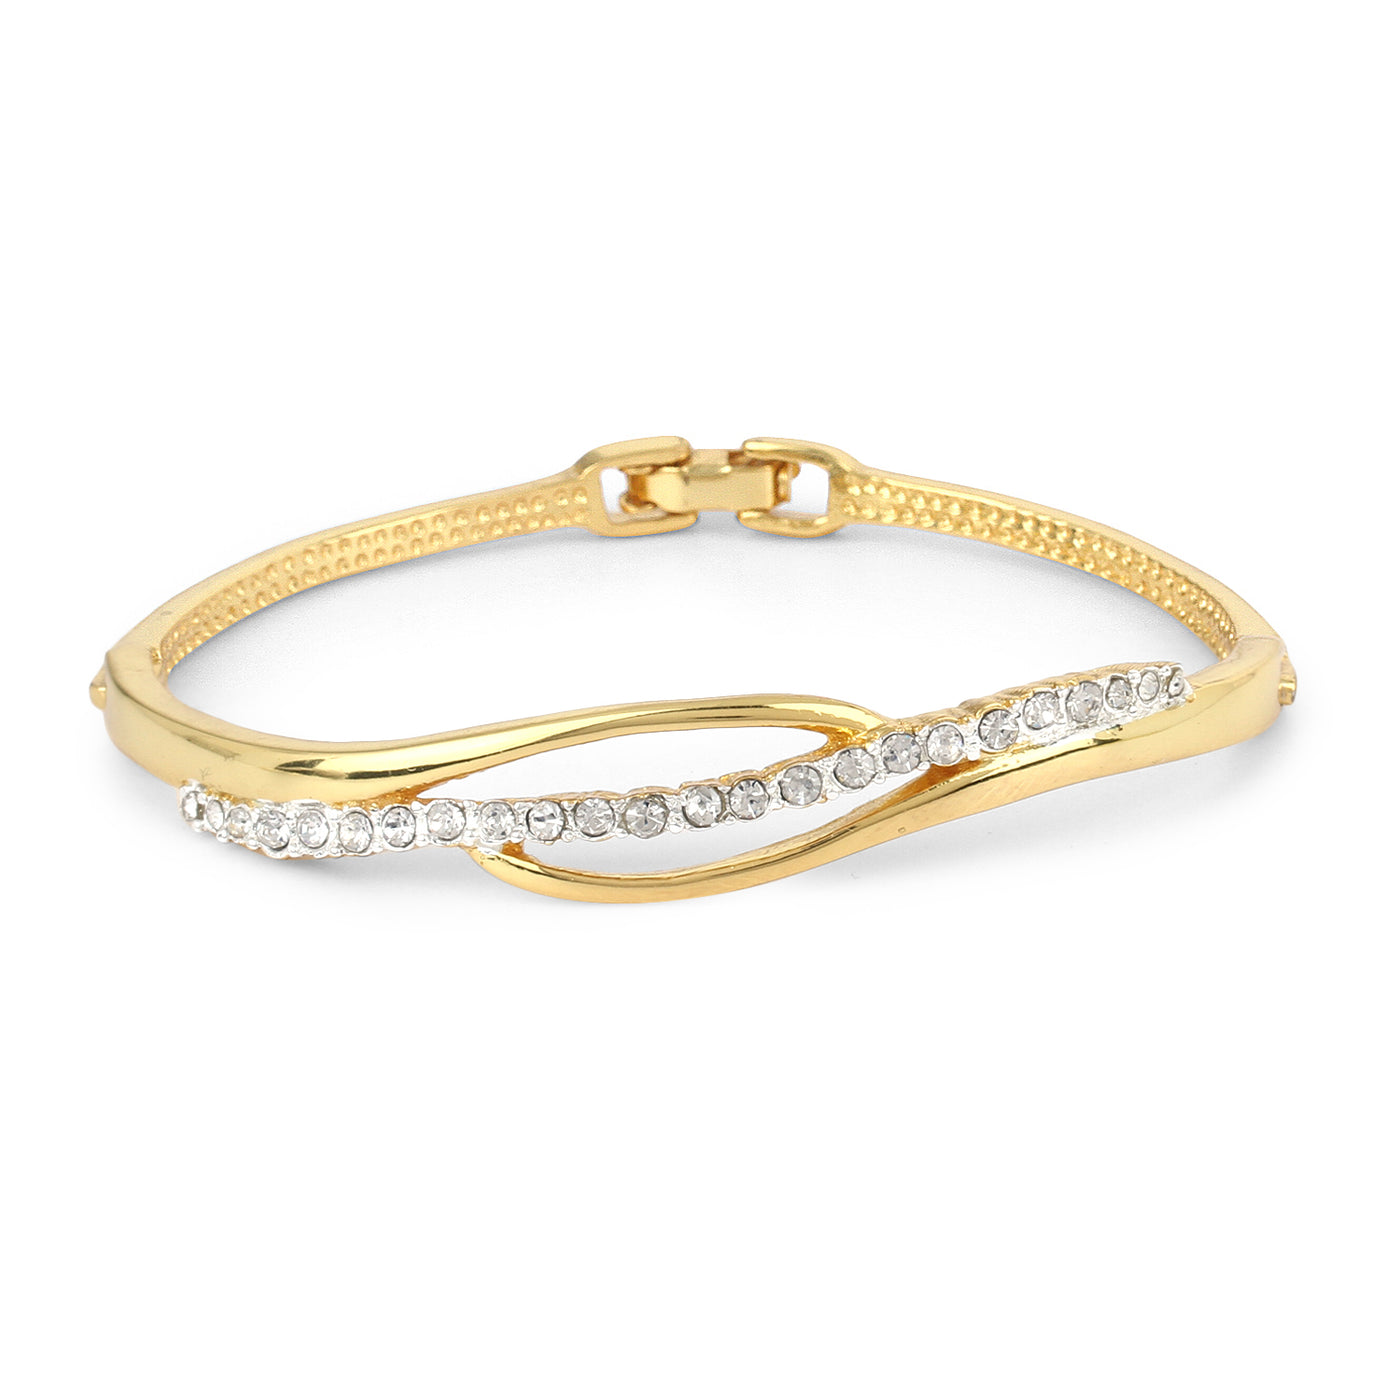 Estele Gold & Rhodium Plated Glamorous Cuff Bracelet with Austrian Crystals for Women